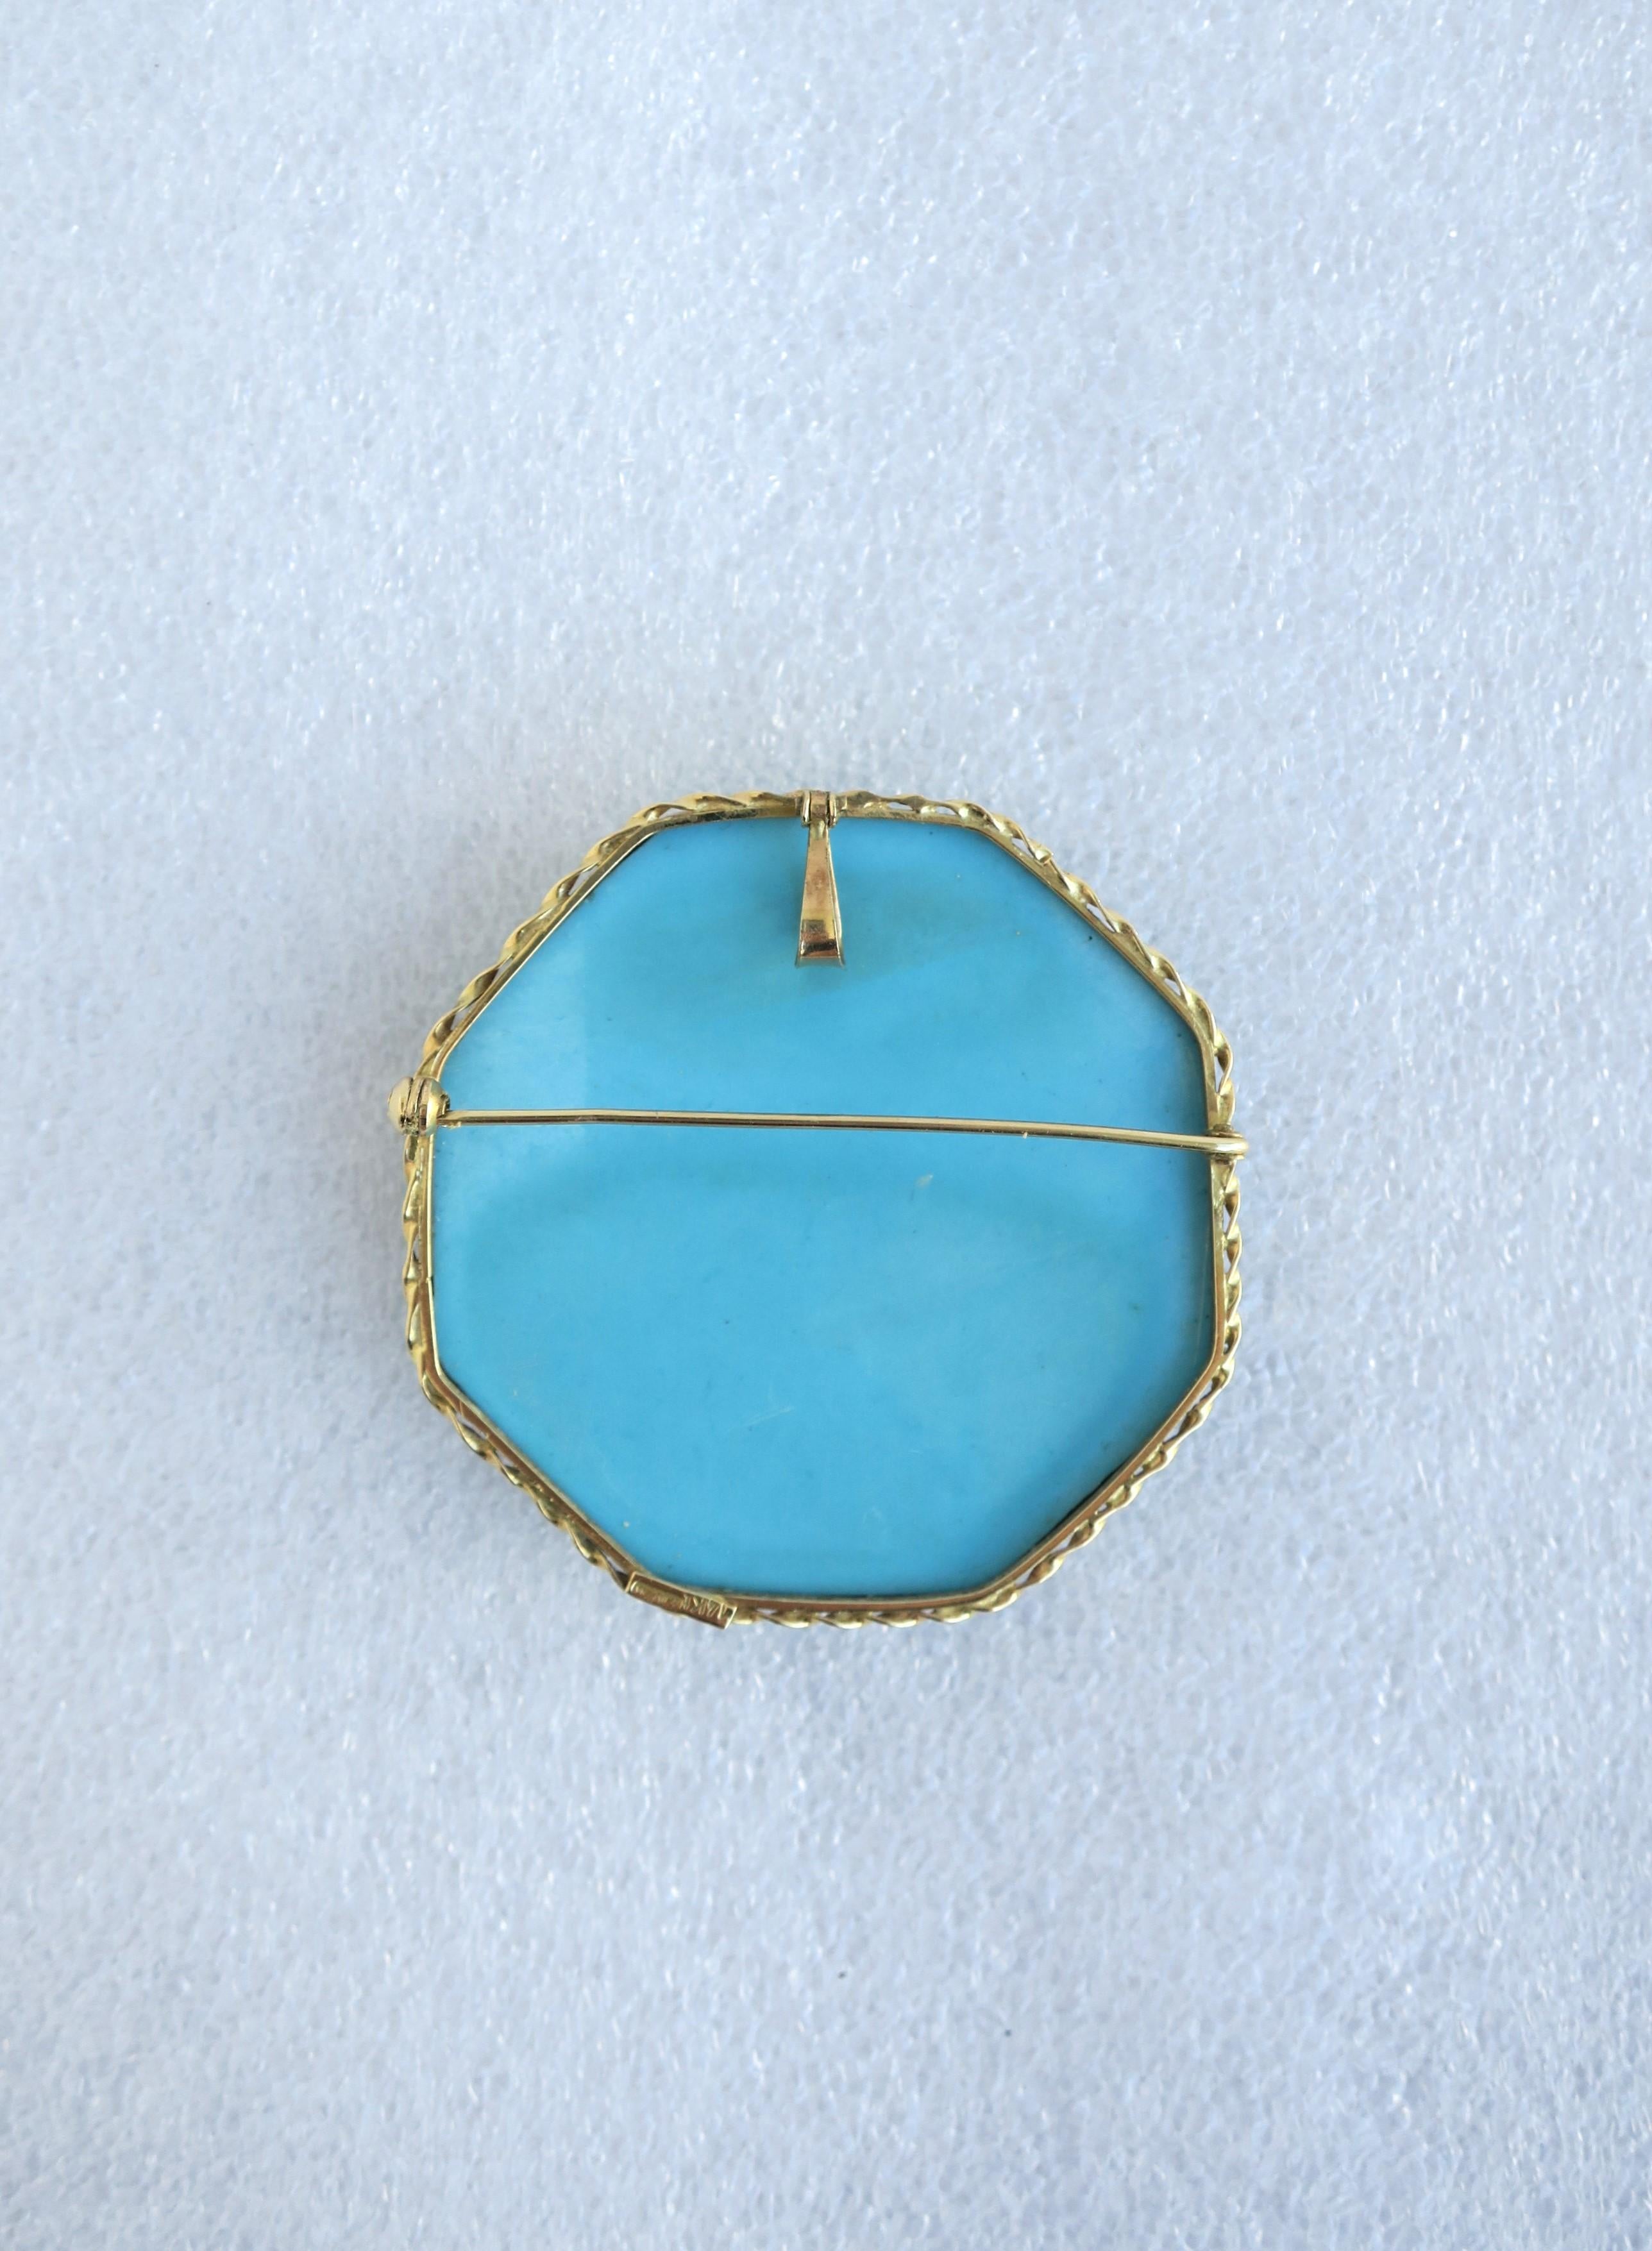 Italian Turquoise and 14-Karat Gold Pendant Necklace and Brooch Buccellati Style 11